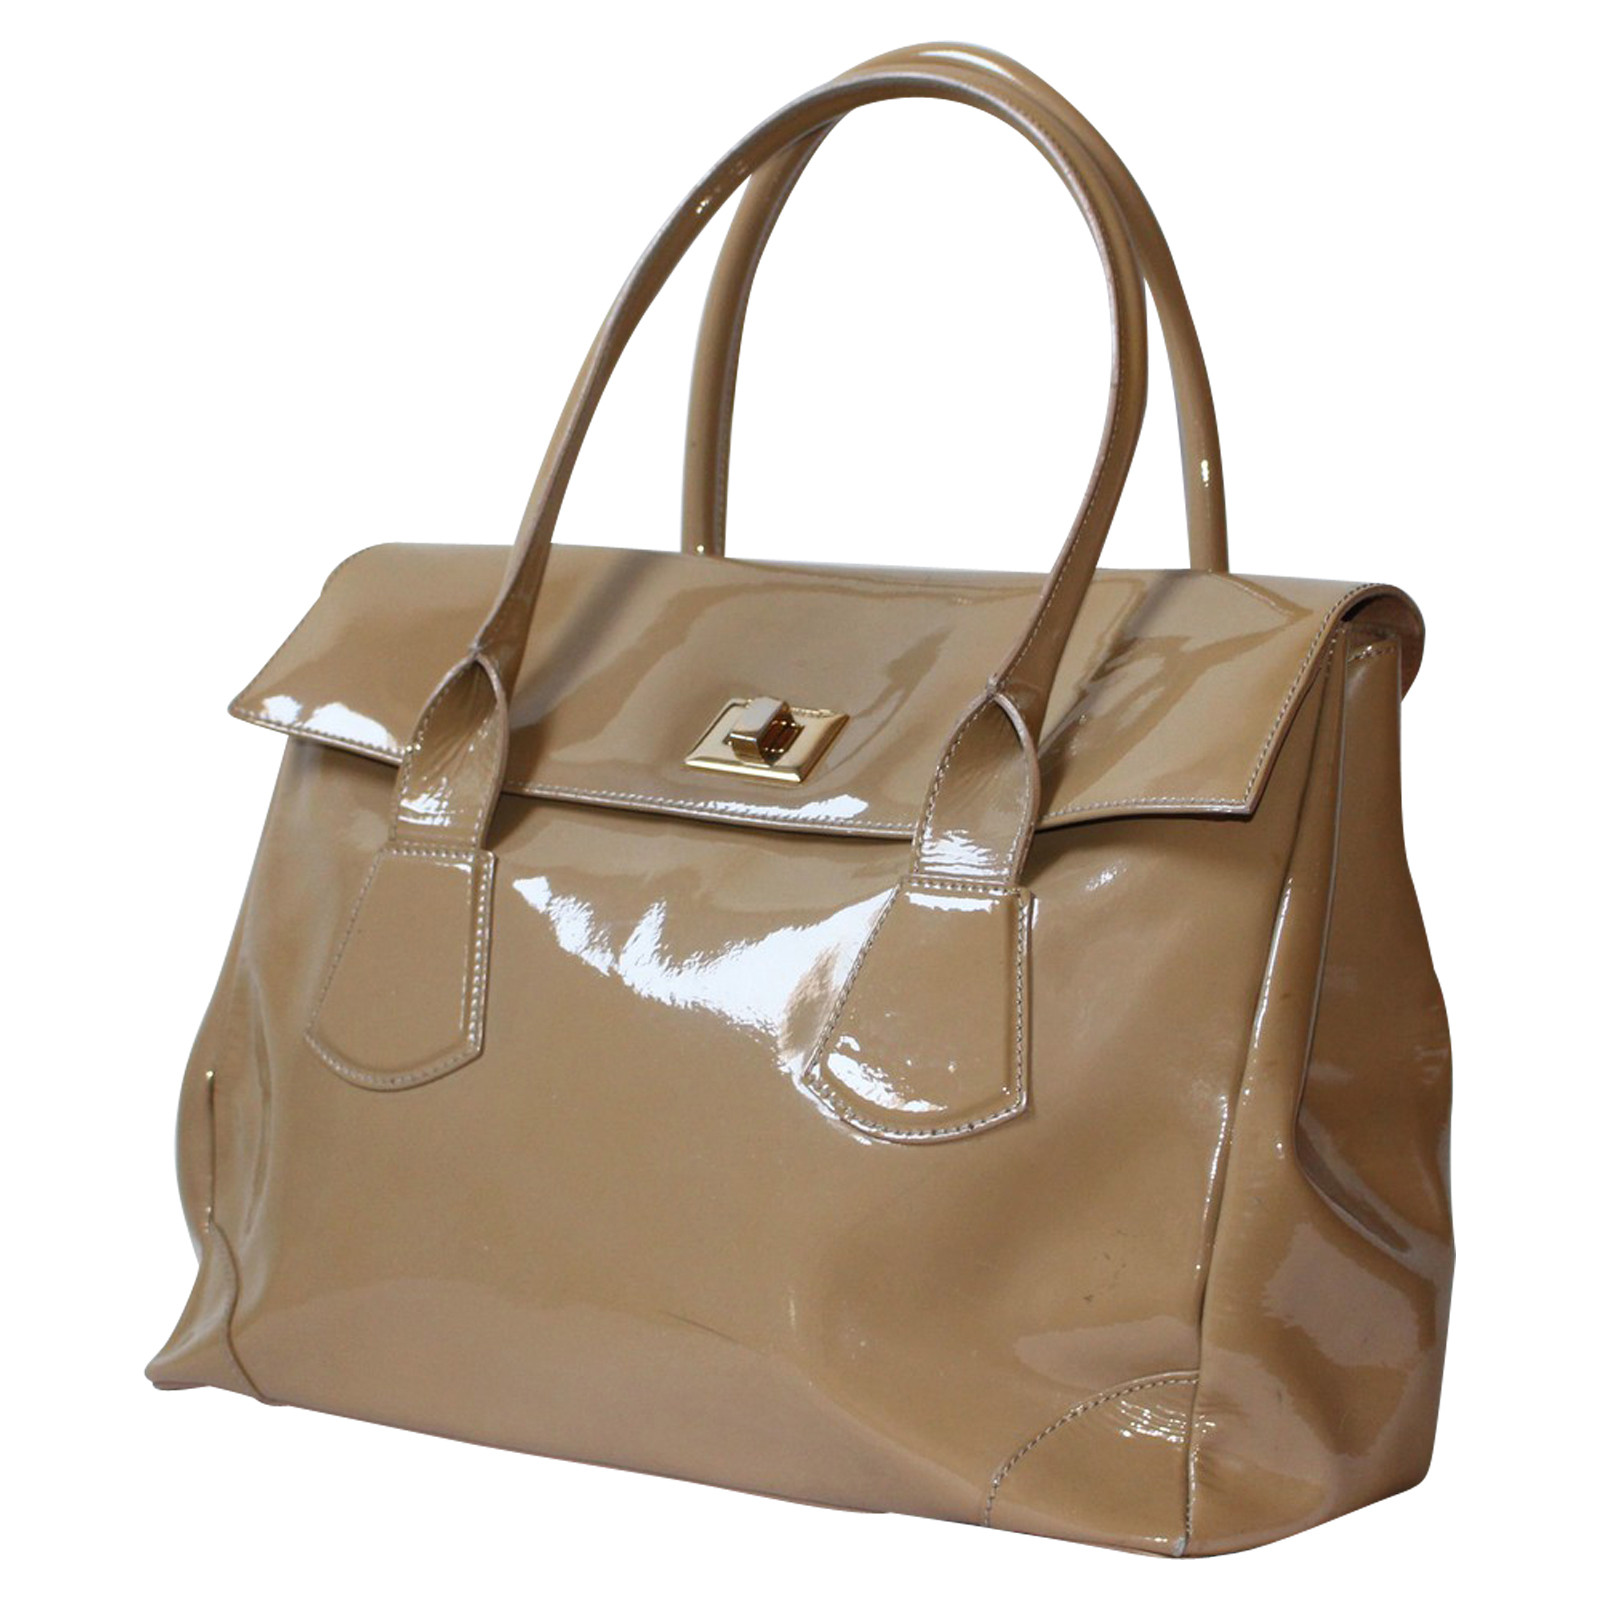 L.K. Bennett Tote bag Patent leather in Beige - Second Hand L.K. Bennett  Tote bag Patent leather in Beige buy used for 65€ (4231209)